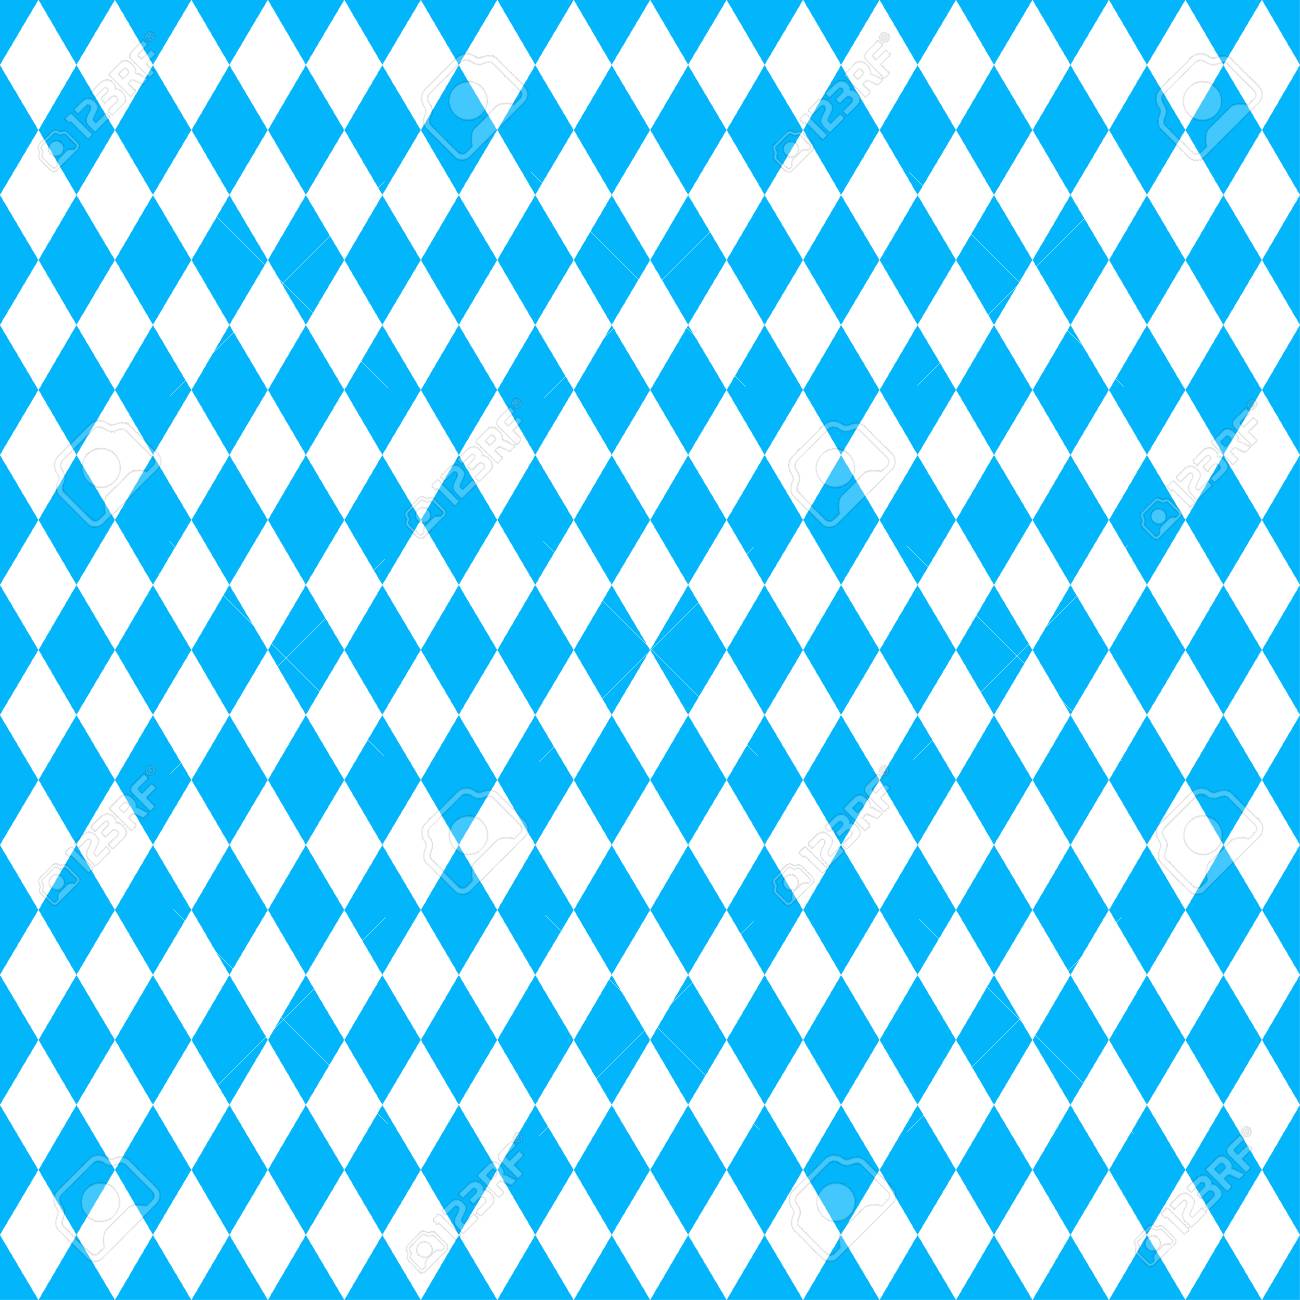 Background To The Holiday Oktoberfest Blue And White Colored